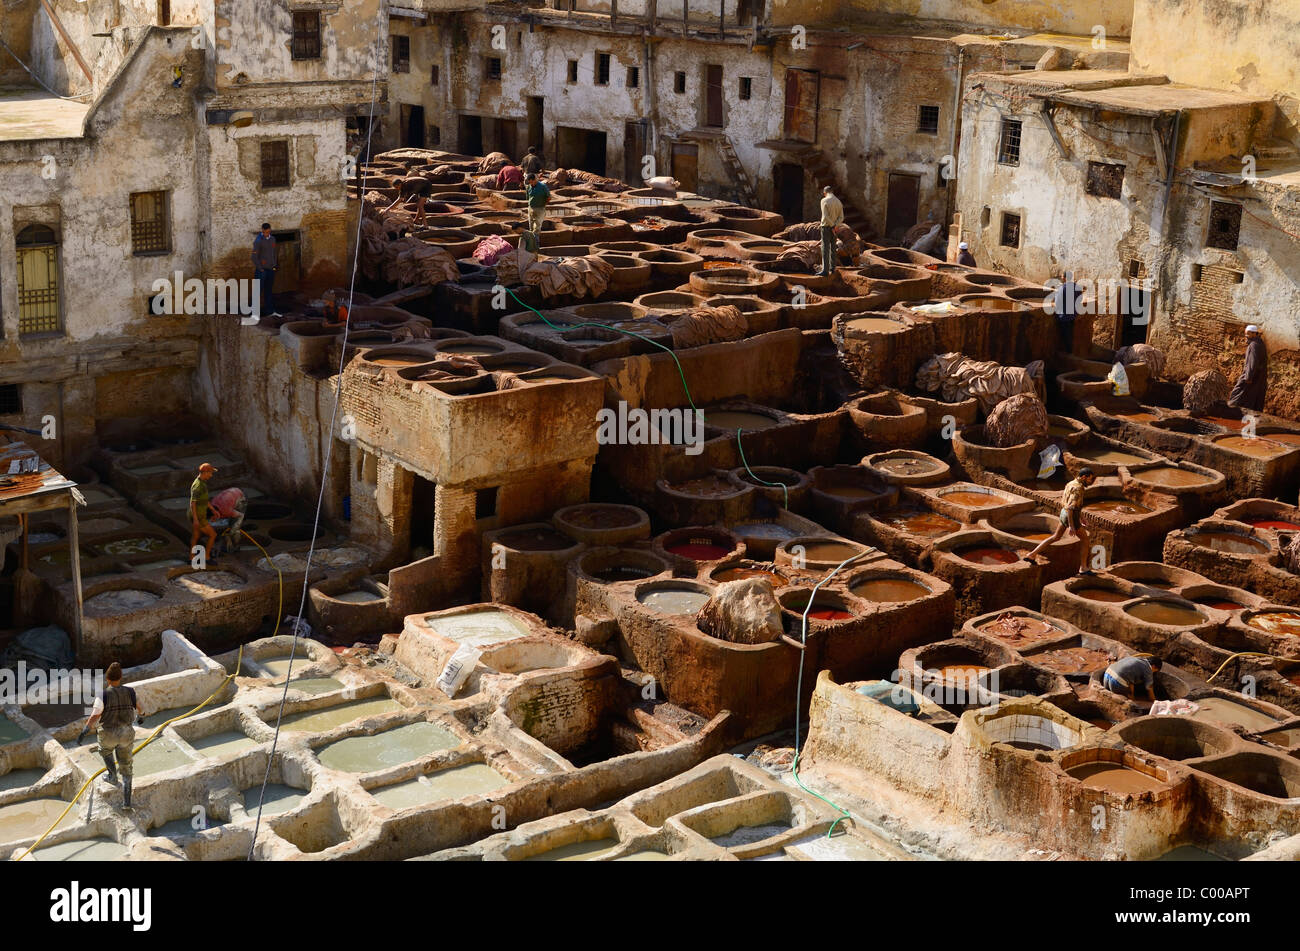 White mineral soaking vats and brown vegetable tanning pits in the Fes tannery Chouara Quarter Fez Morocco North Africa Stock Photo